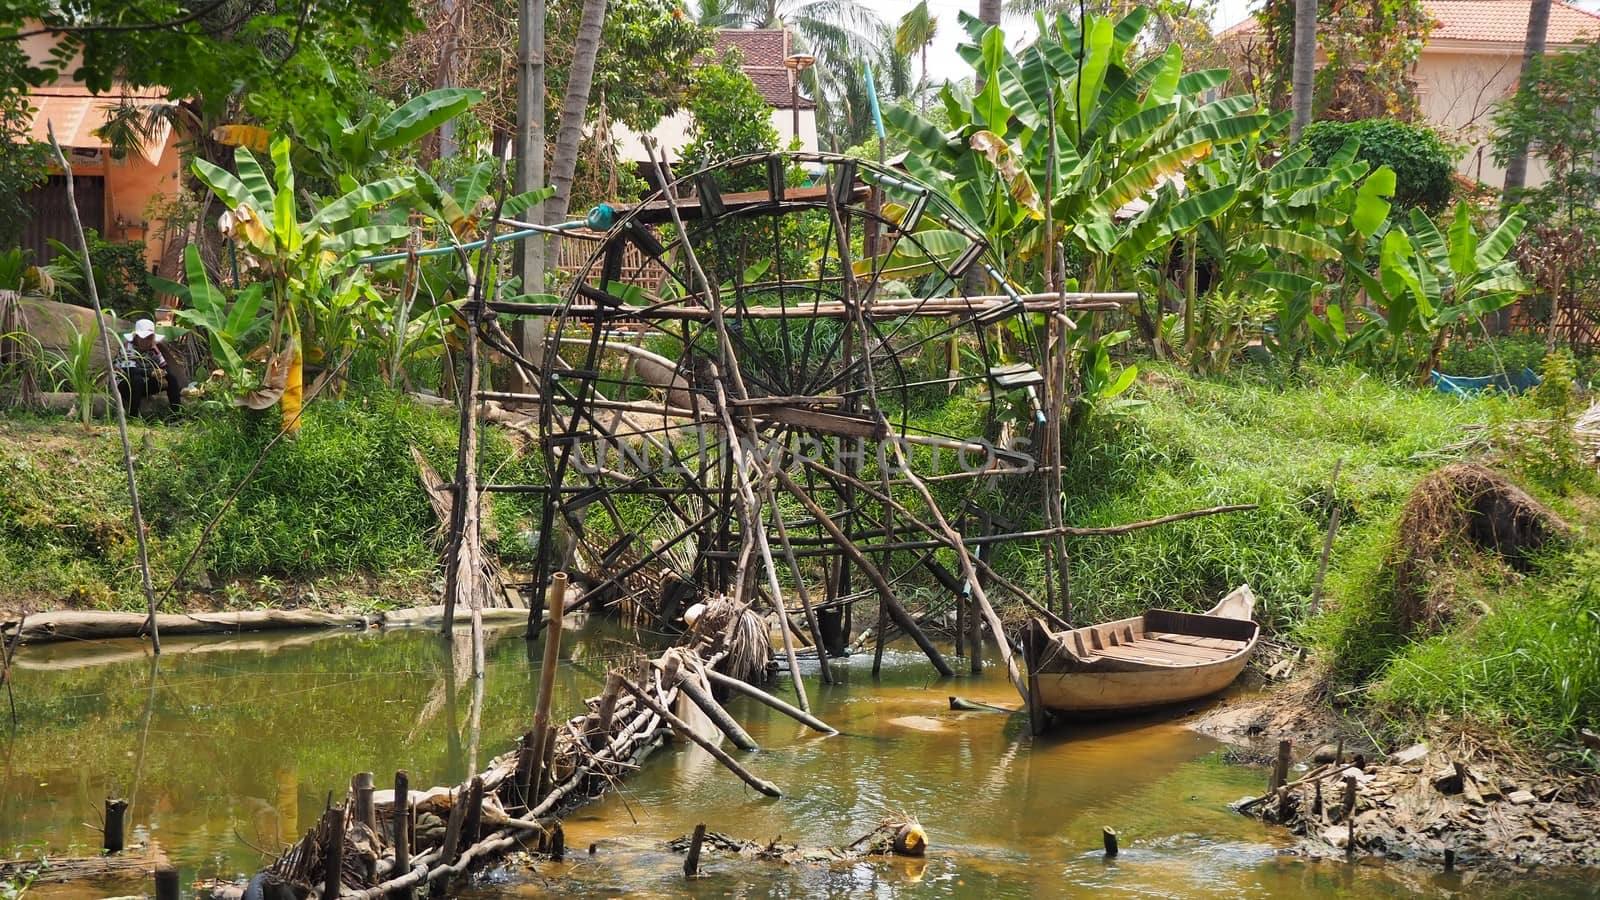 water pump wheel and boat in river in cambodia siem reap asia